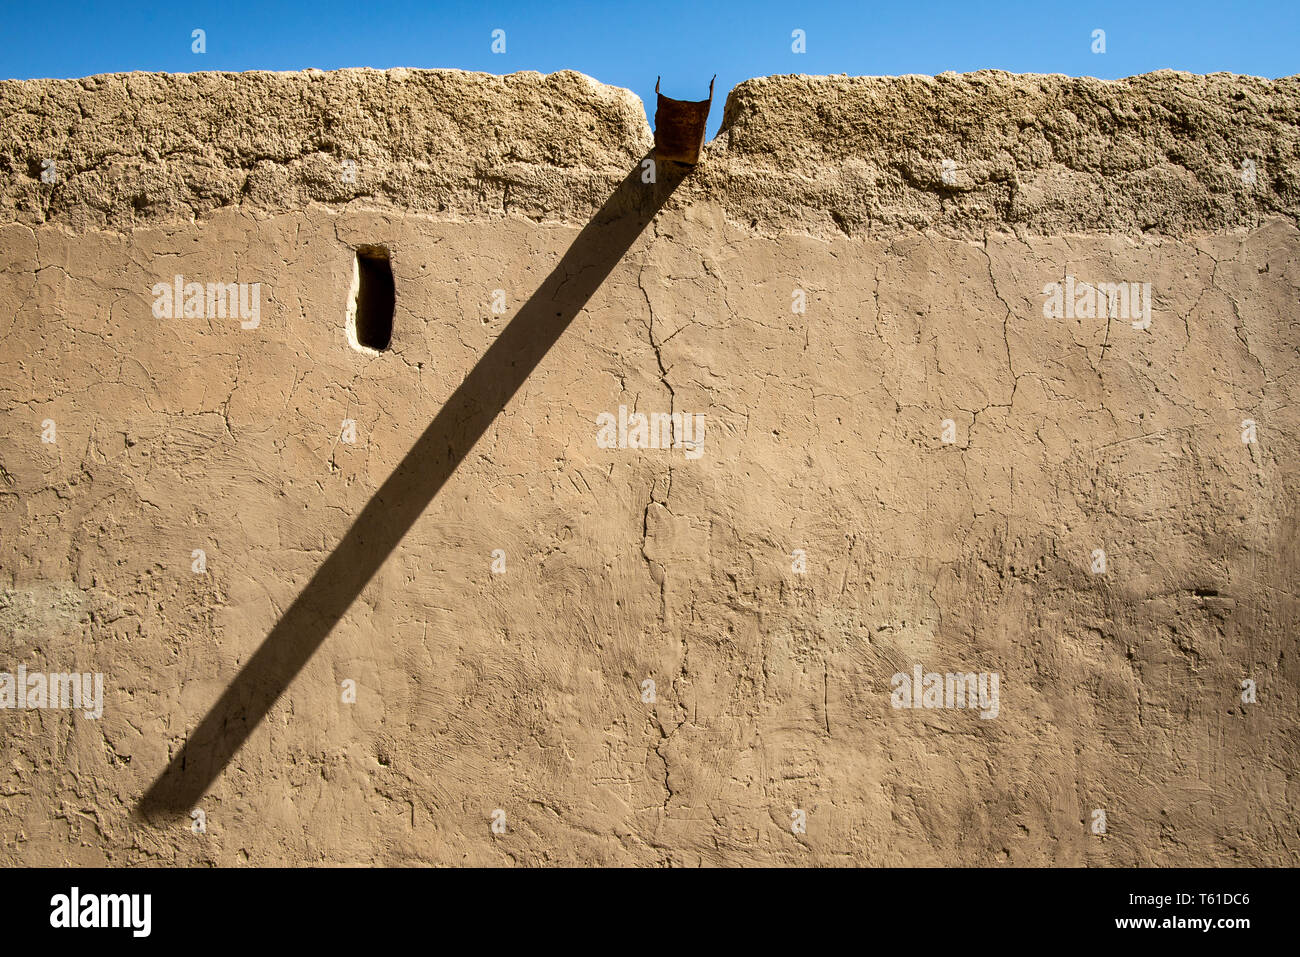 Small window and prominent traditional gutter casting a long shadow on the wall of an old renovated Arabian building, Al Ain, United Arab Emirates Stock Photo